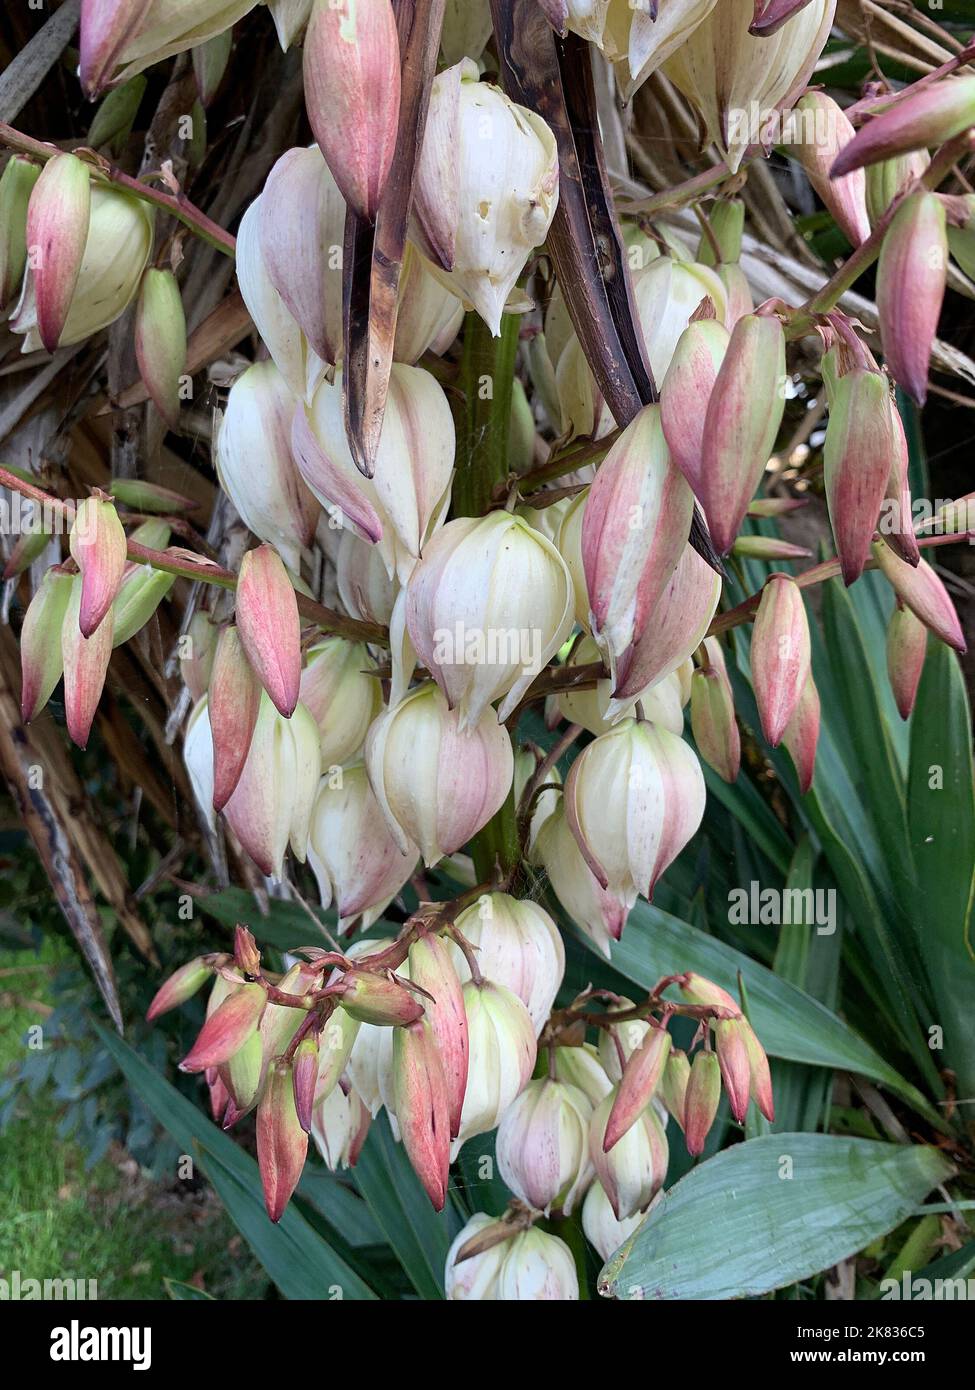 Close up of the light variegated cluster of flowers of the perennial garden plant Yucca. Stock Photo